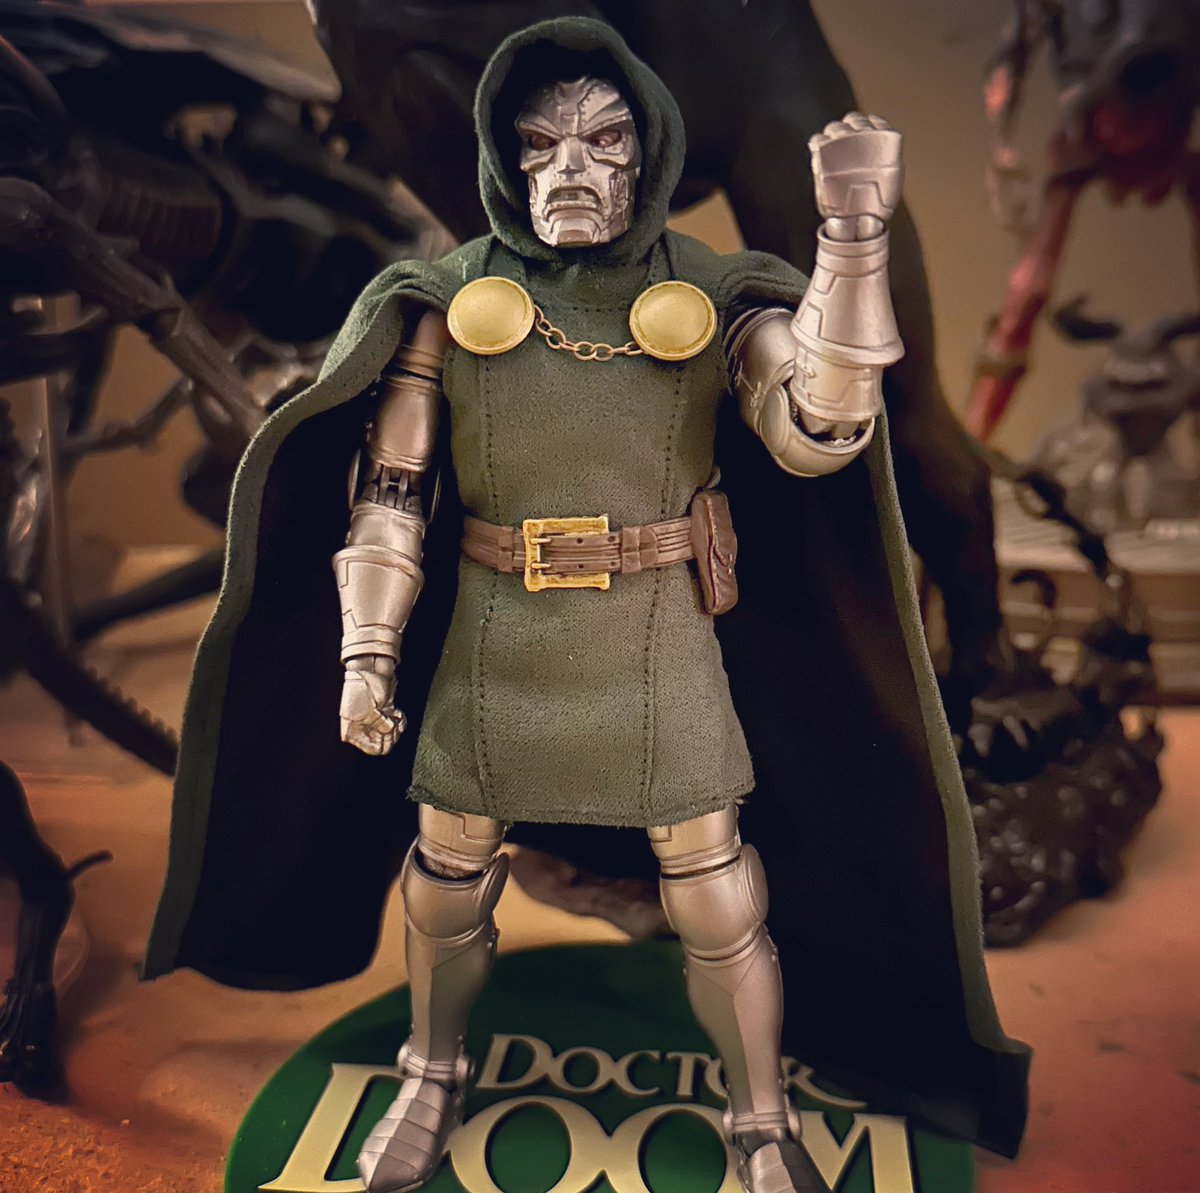 Got myself a Marvel One:12 collectible Doctor Doom statue from @replaytoys_hv today. @marvel #marvel #marvelcomics #doctordoom #collectiblestatues